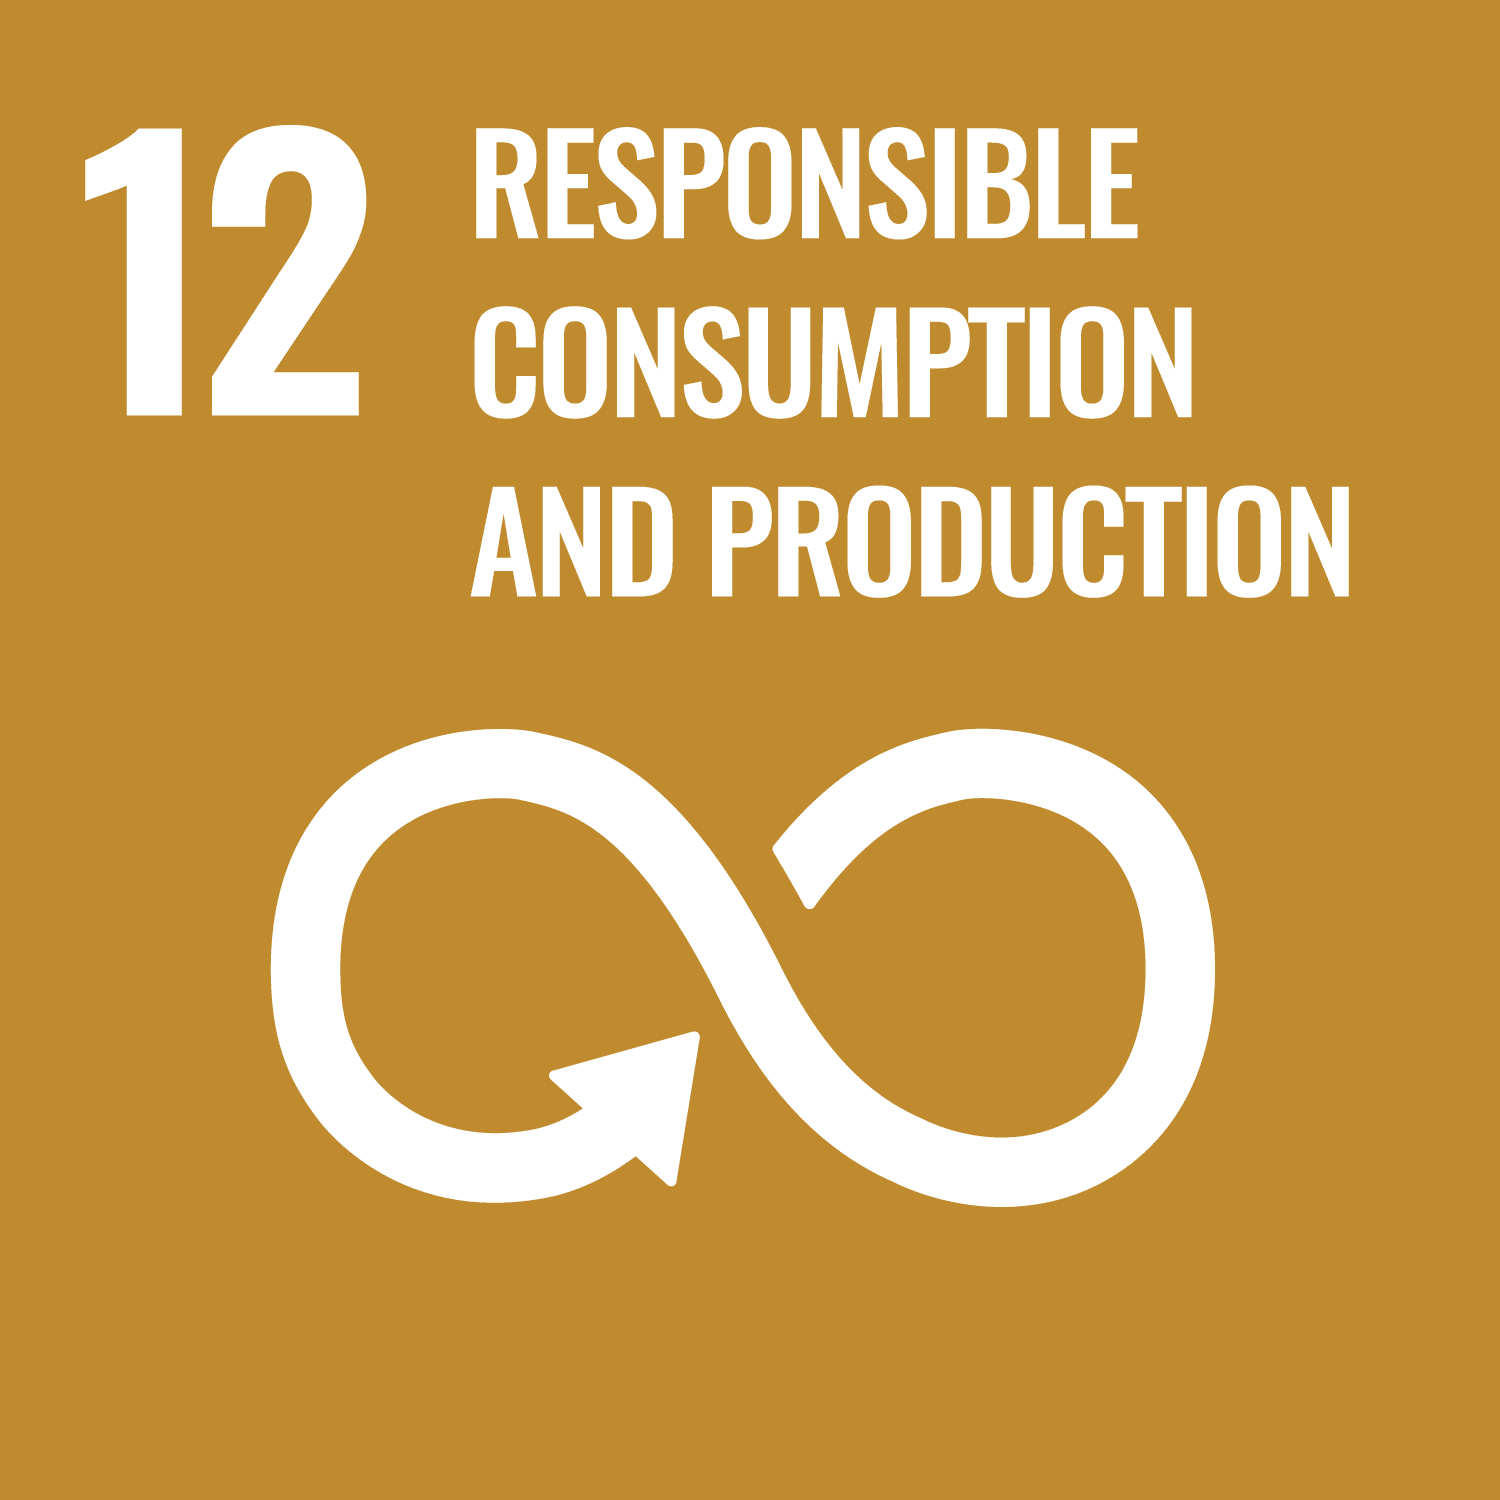 Graphic image of an infinity loop with text saying '12 responsible production and consumption' reflecting Sustainable Development Goal (SDG) or Global Goal 12